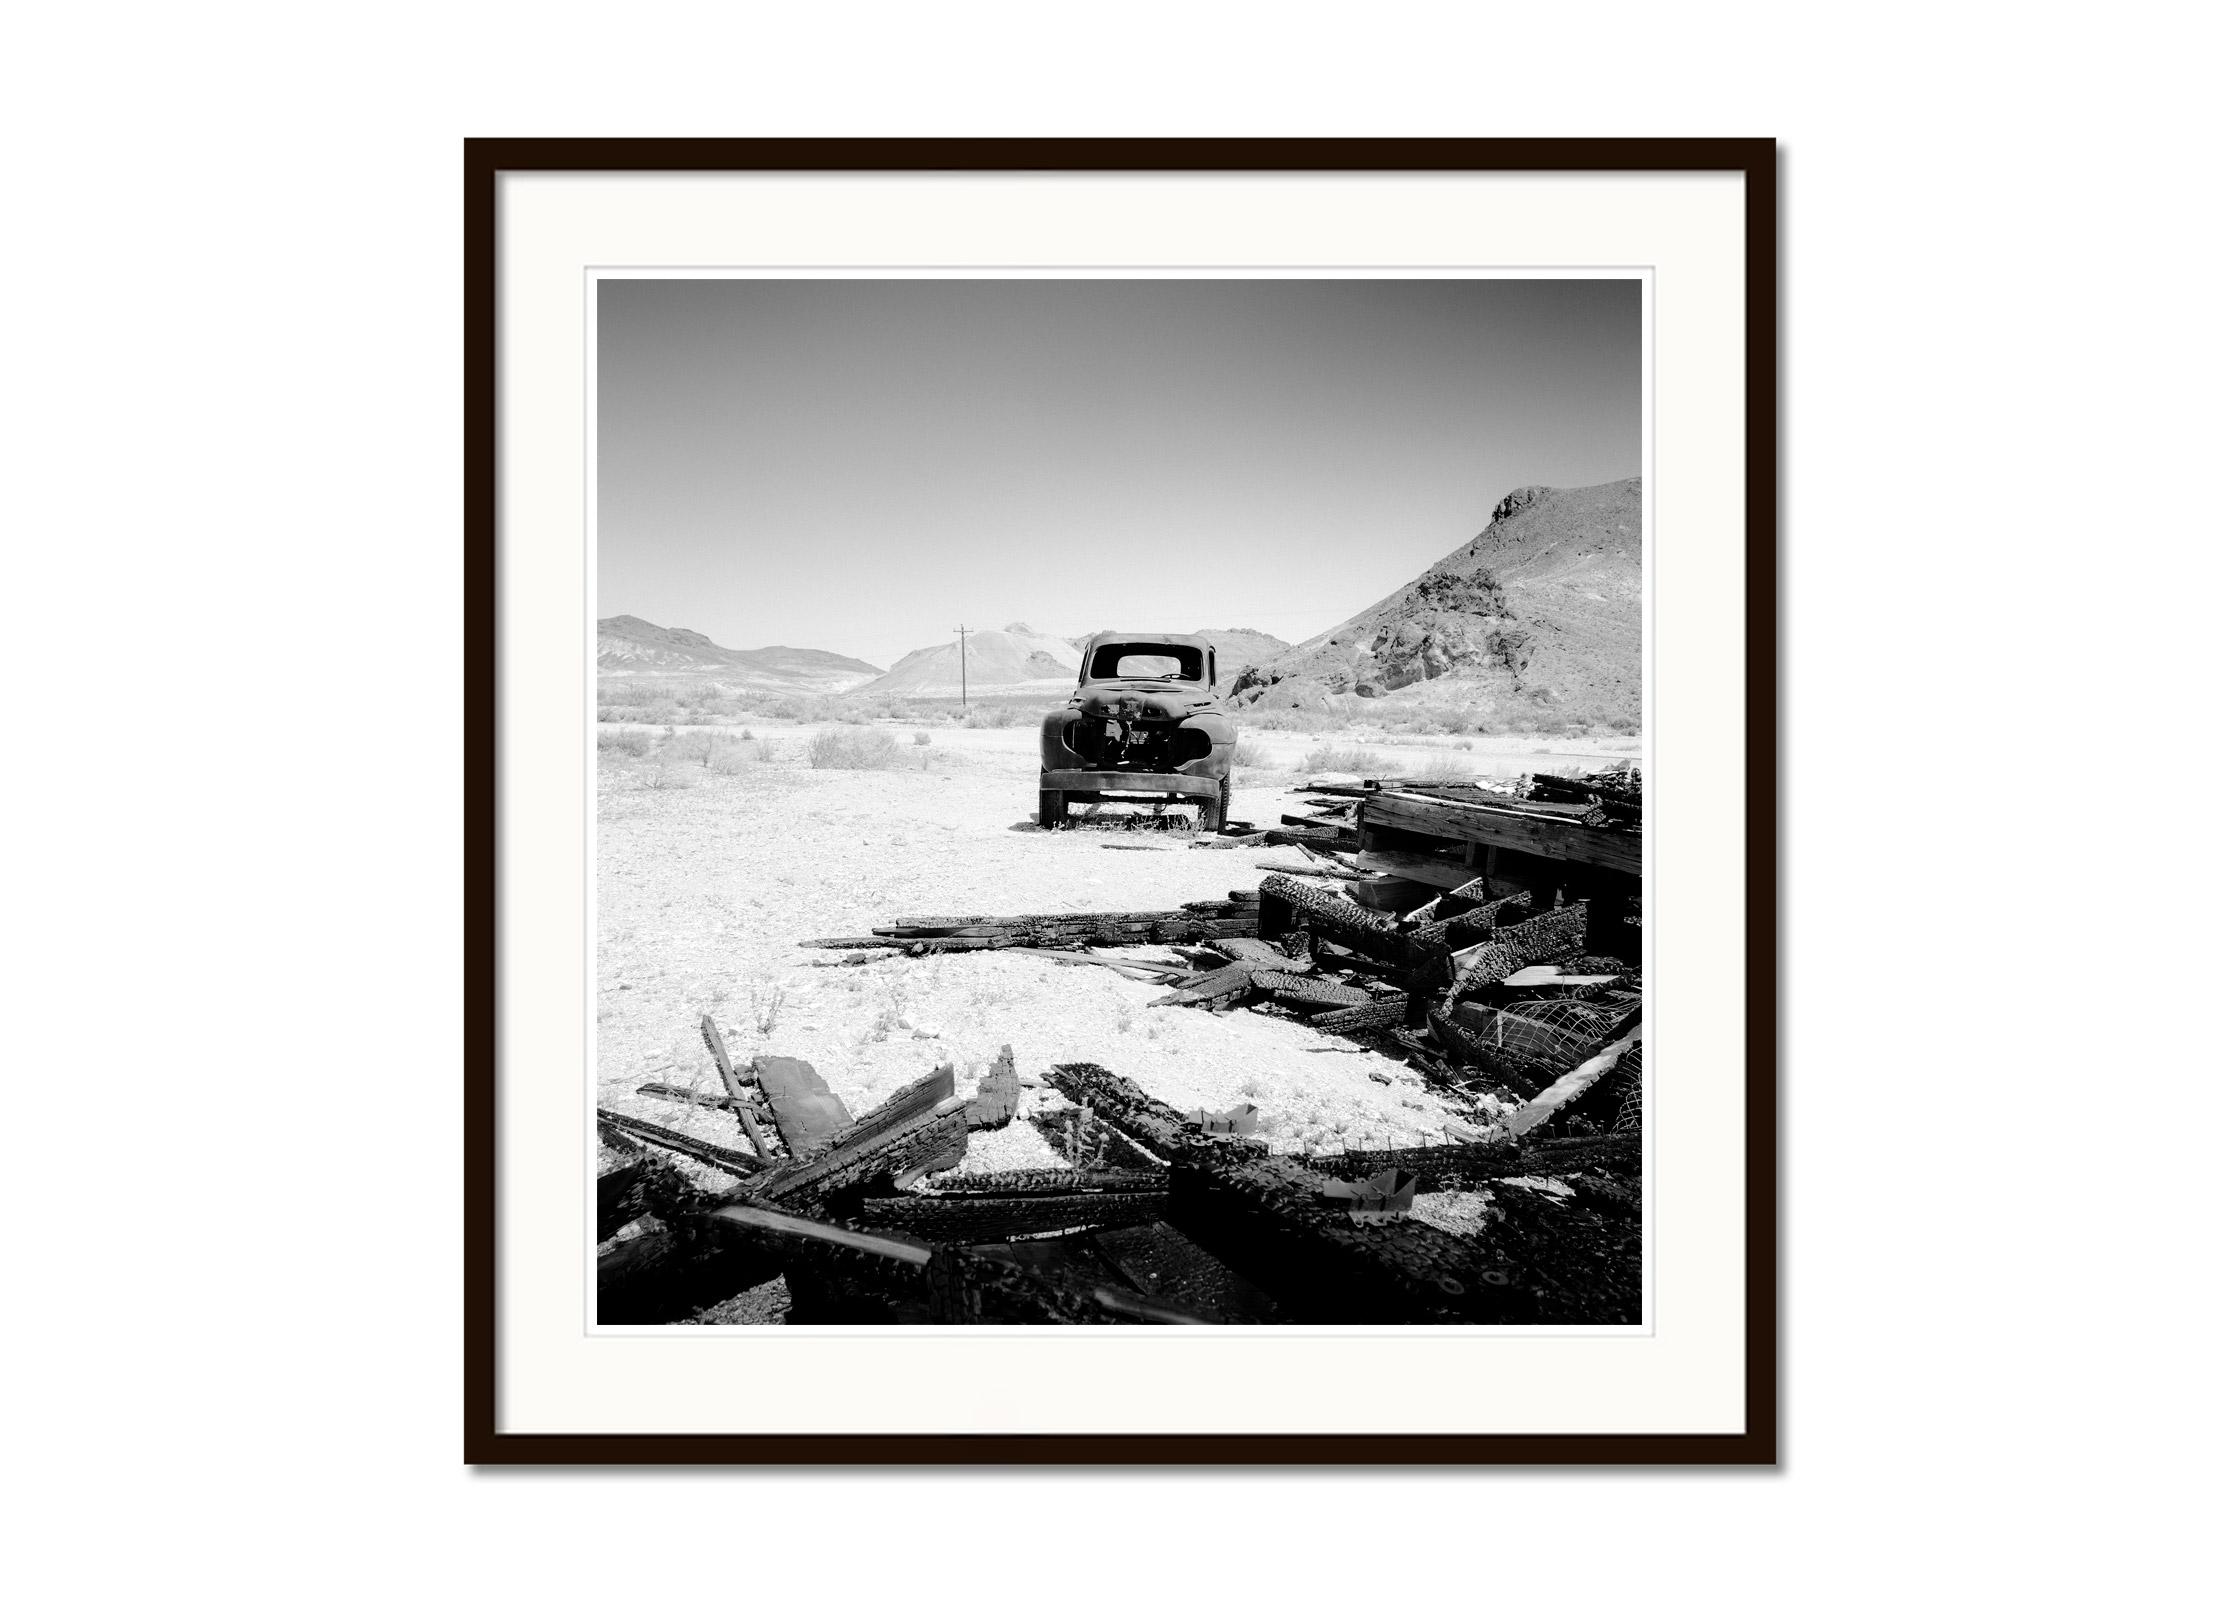 Burnt Down, Old US Car, California, black and white photography, art landscape - Gray Landscape Photograph by Gerald Berghammer